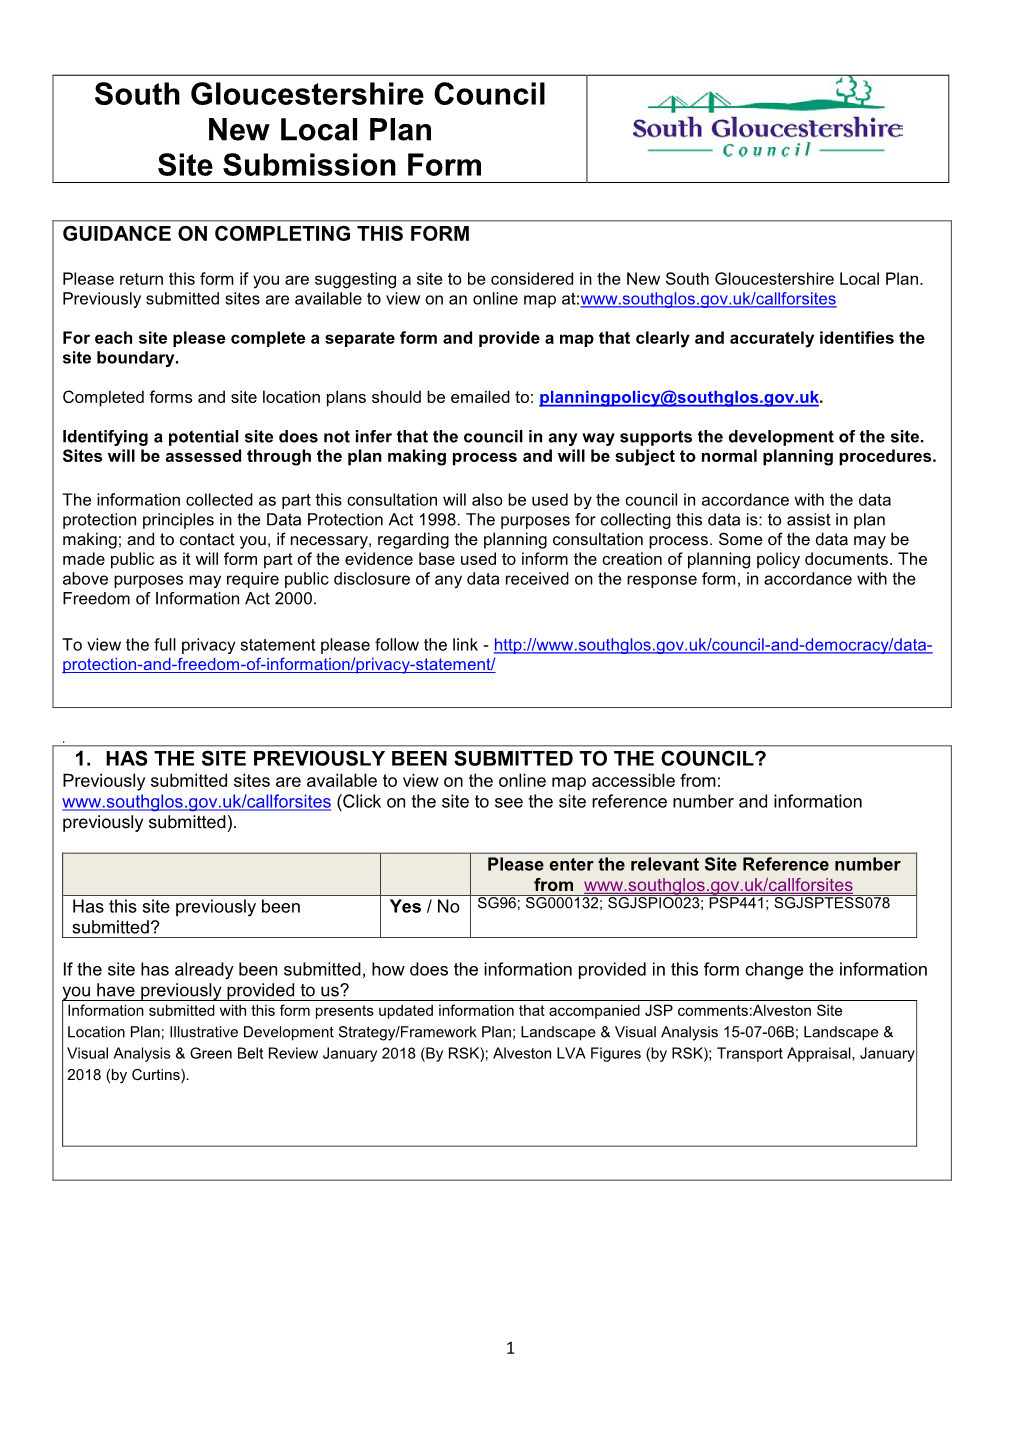 South Gloucestershire Council New Local Plan Site Submission Form